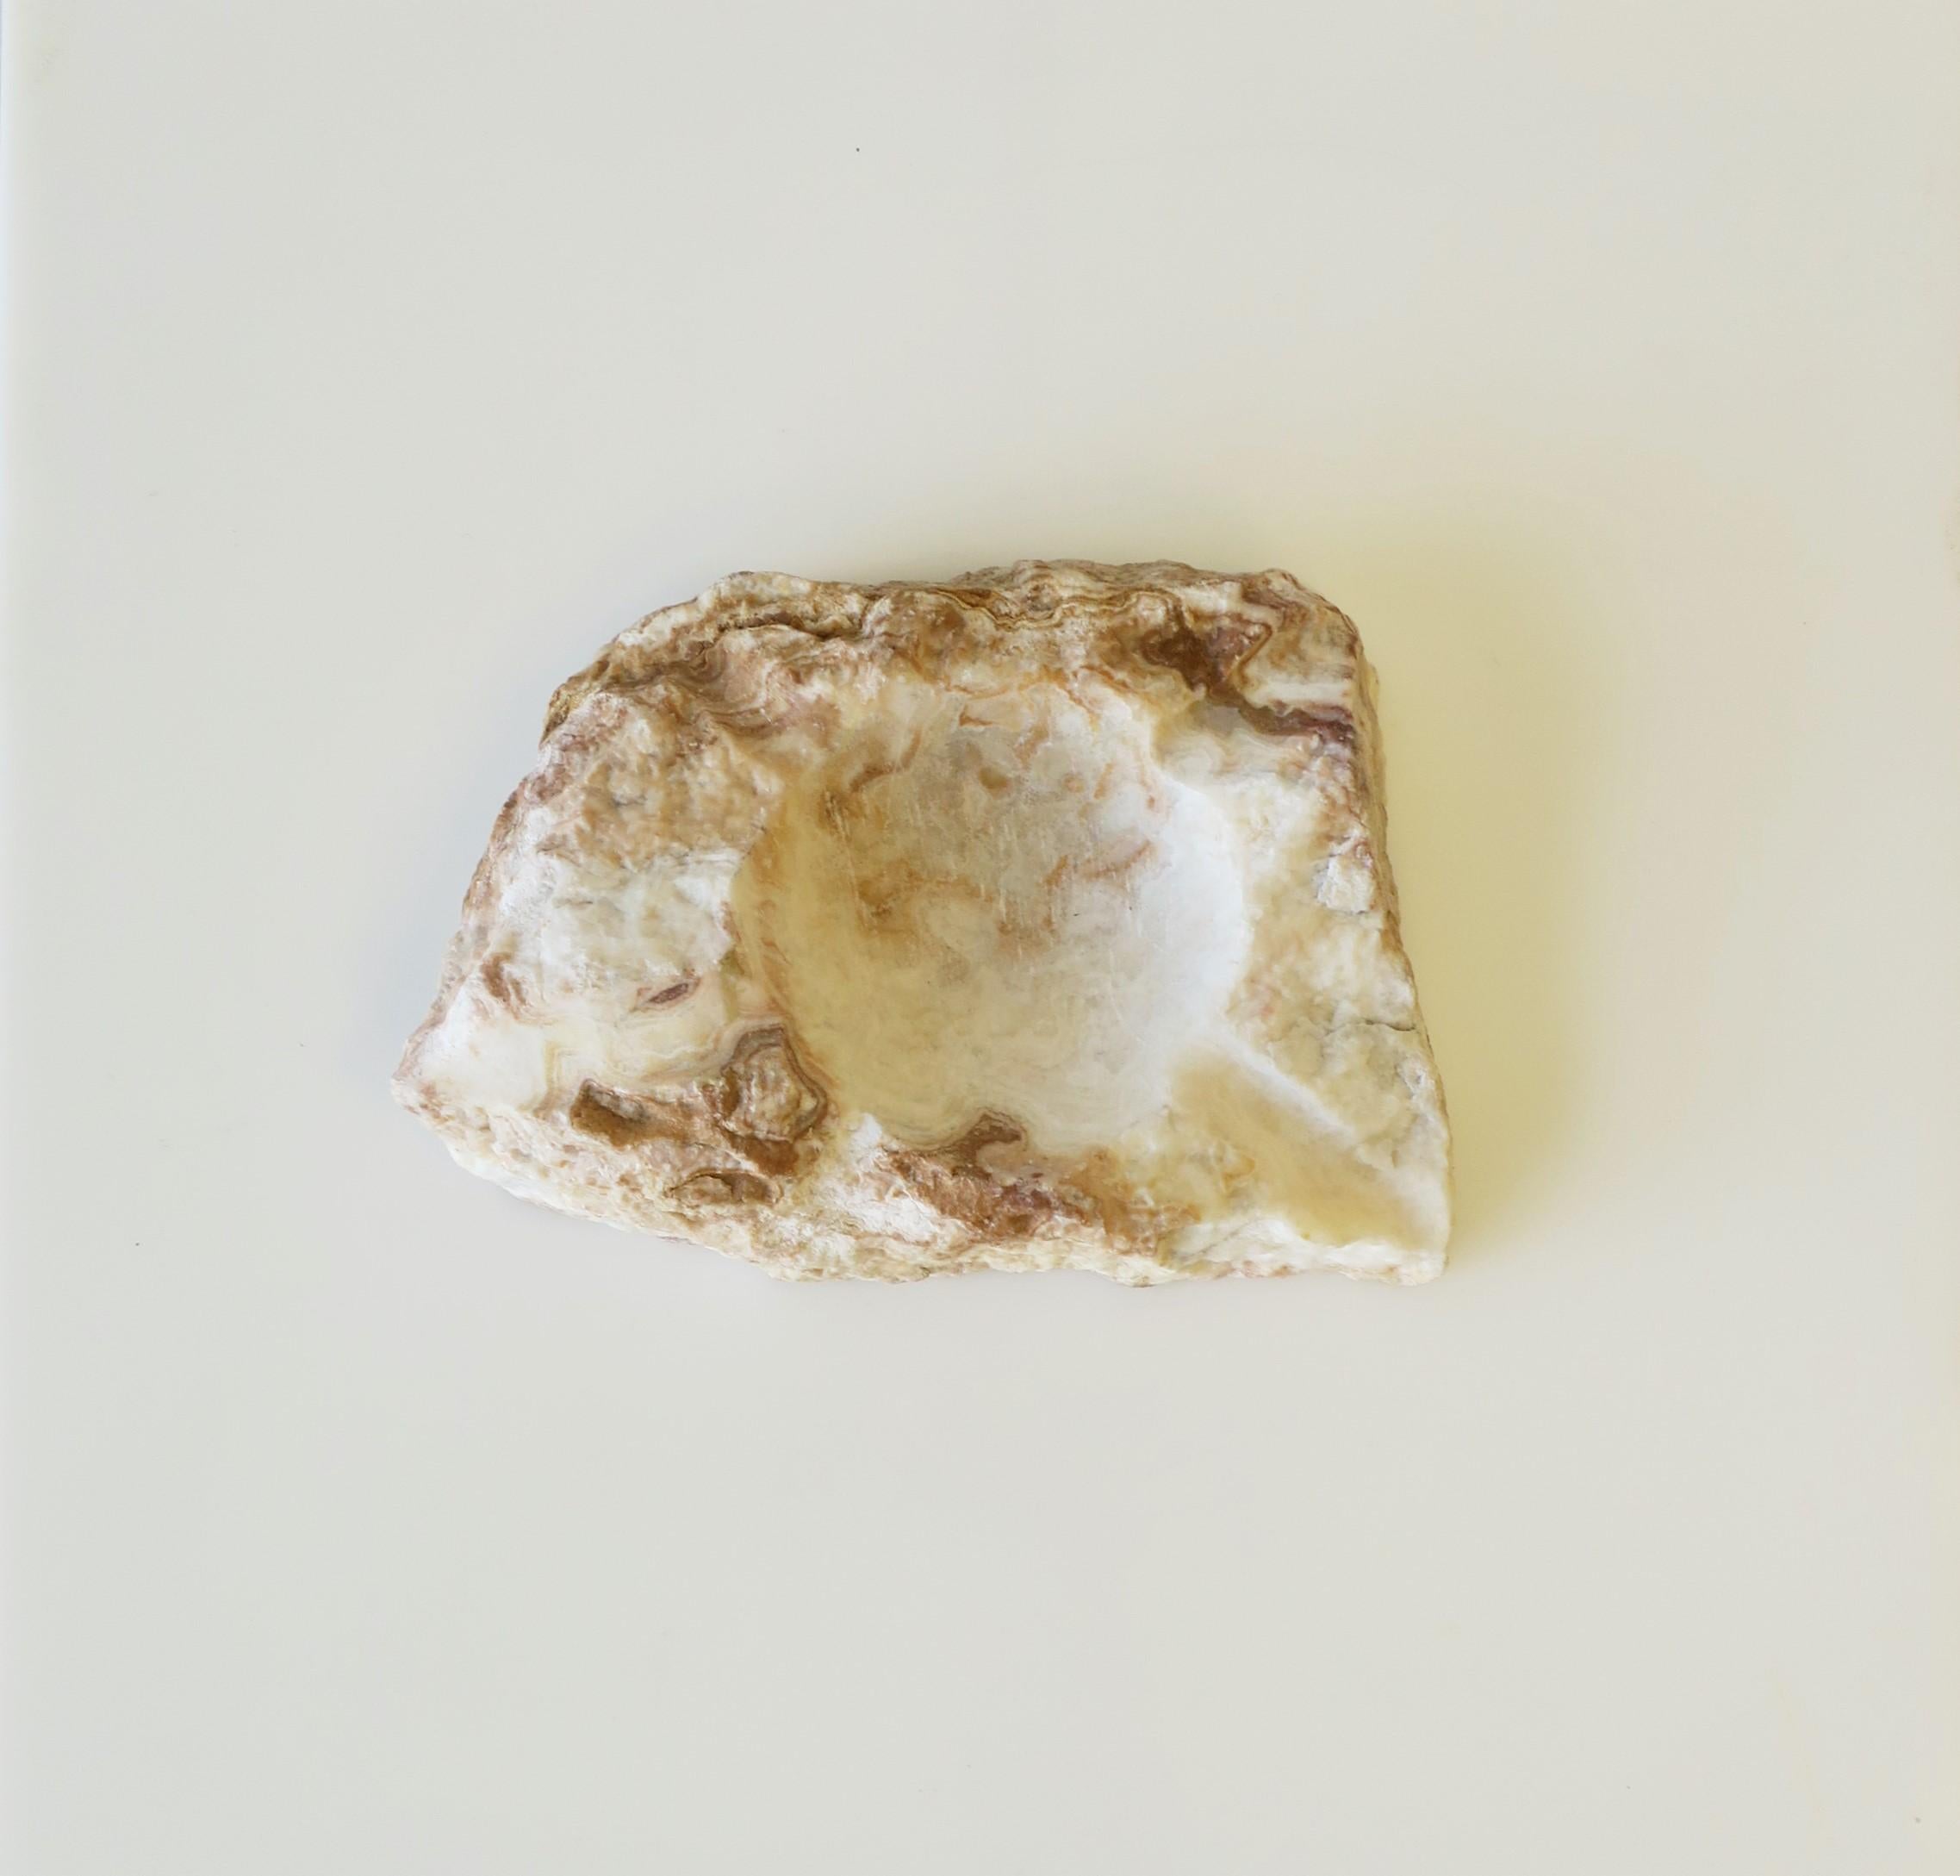 A natural organic raw stone catchall or ashtray in white and neutral colors. Dimensions: 4.5